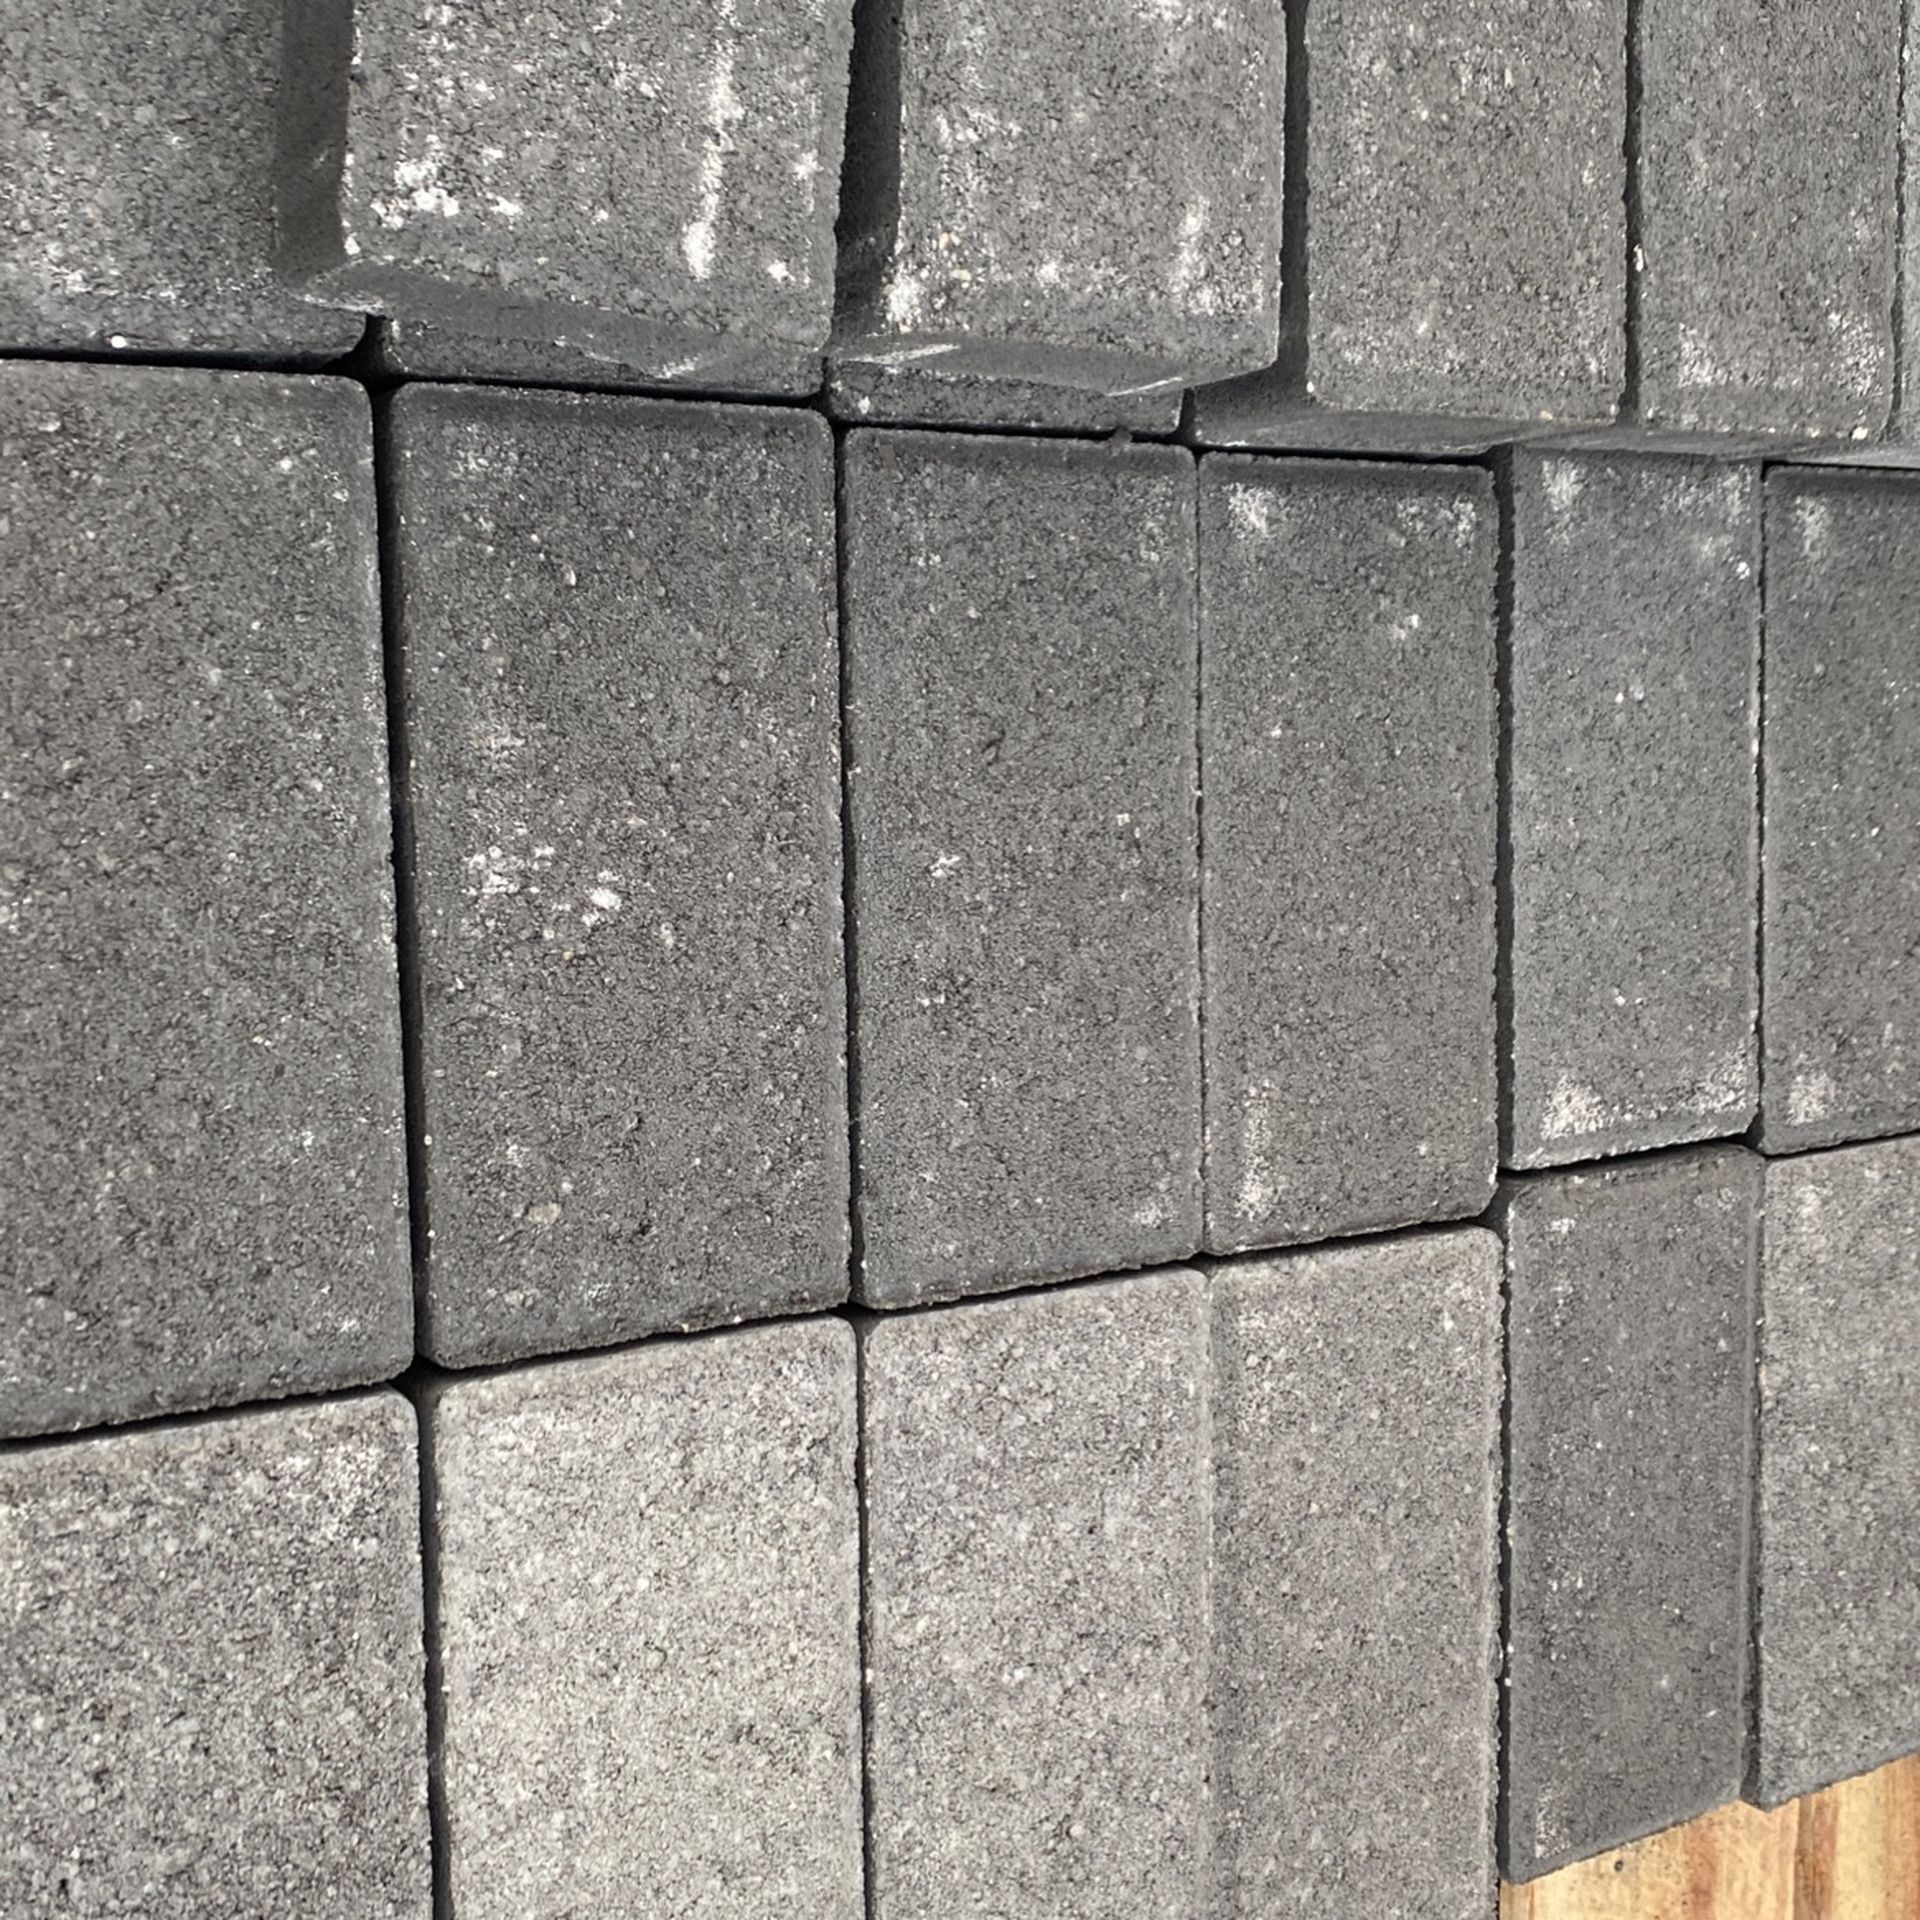 Paver Holland Stone For Sale 1 Pallet